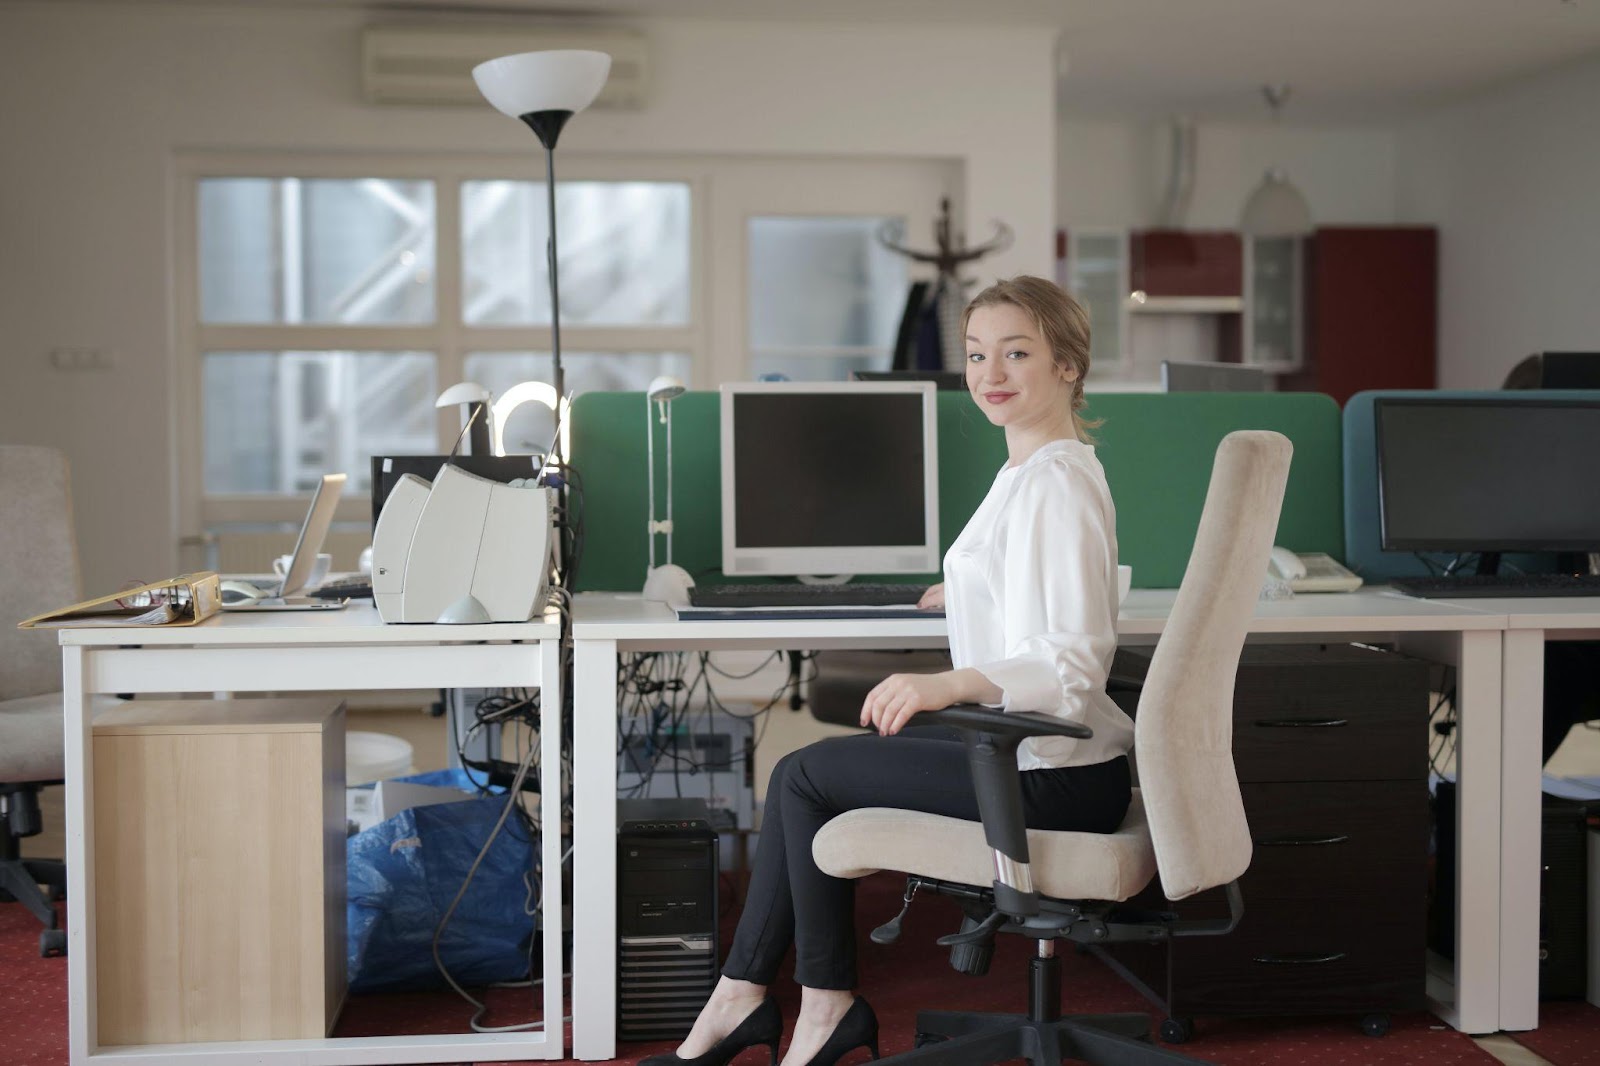 a woman with great sitting posture at work, but unable to get back support due to the depth of the seat and the front edge of the seat being too high.